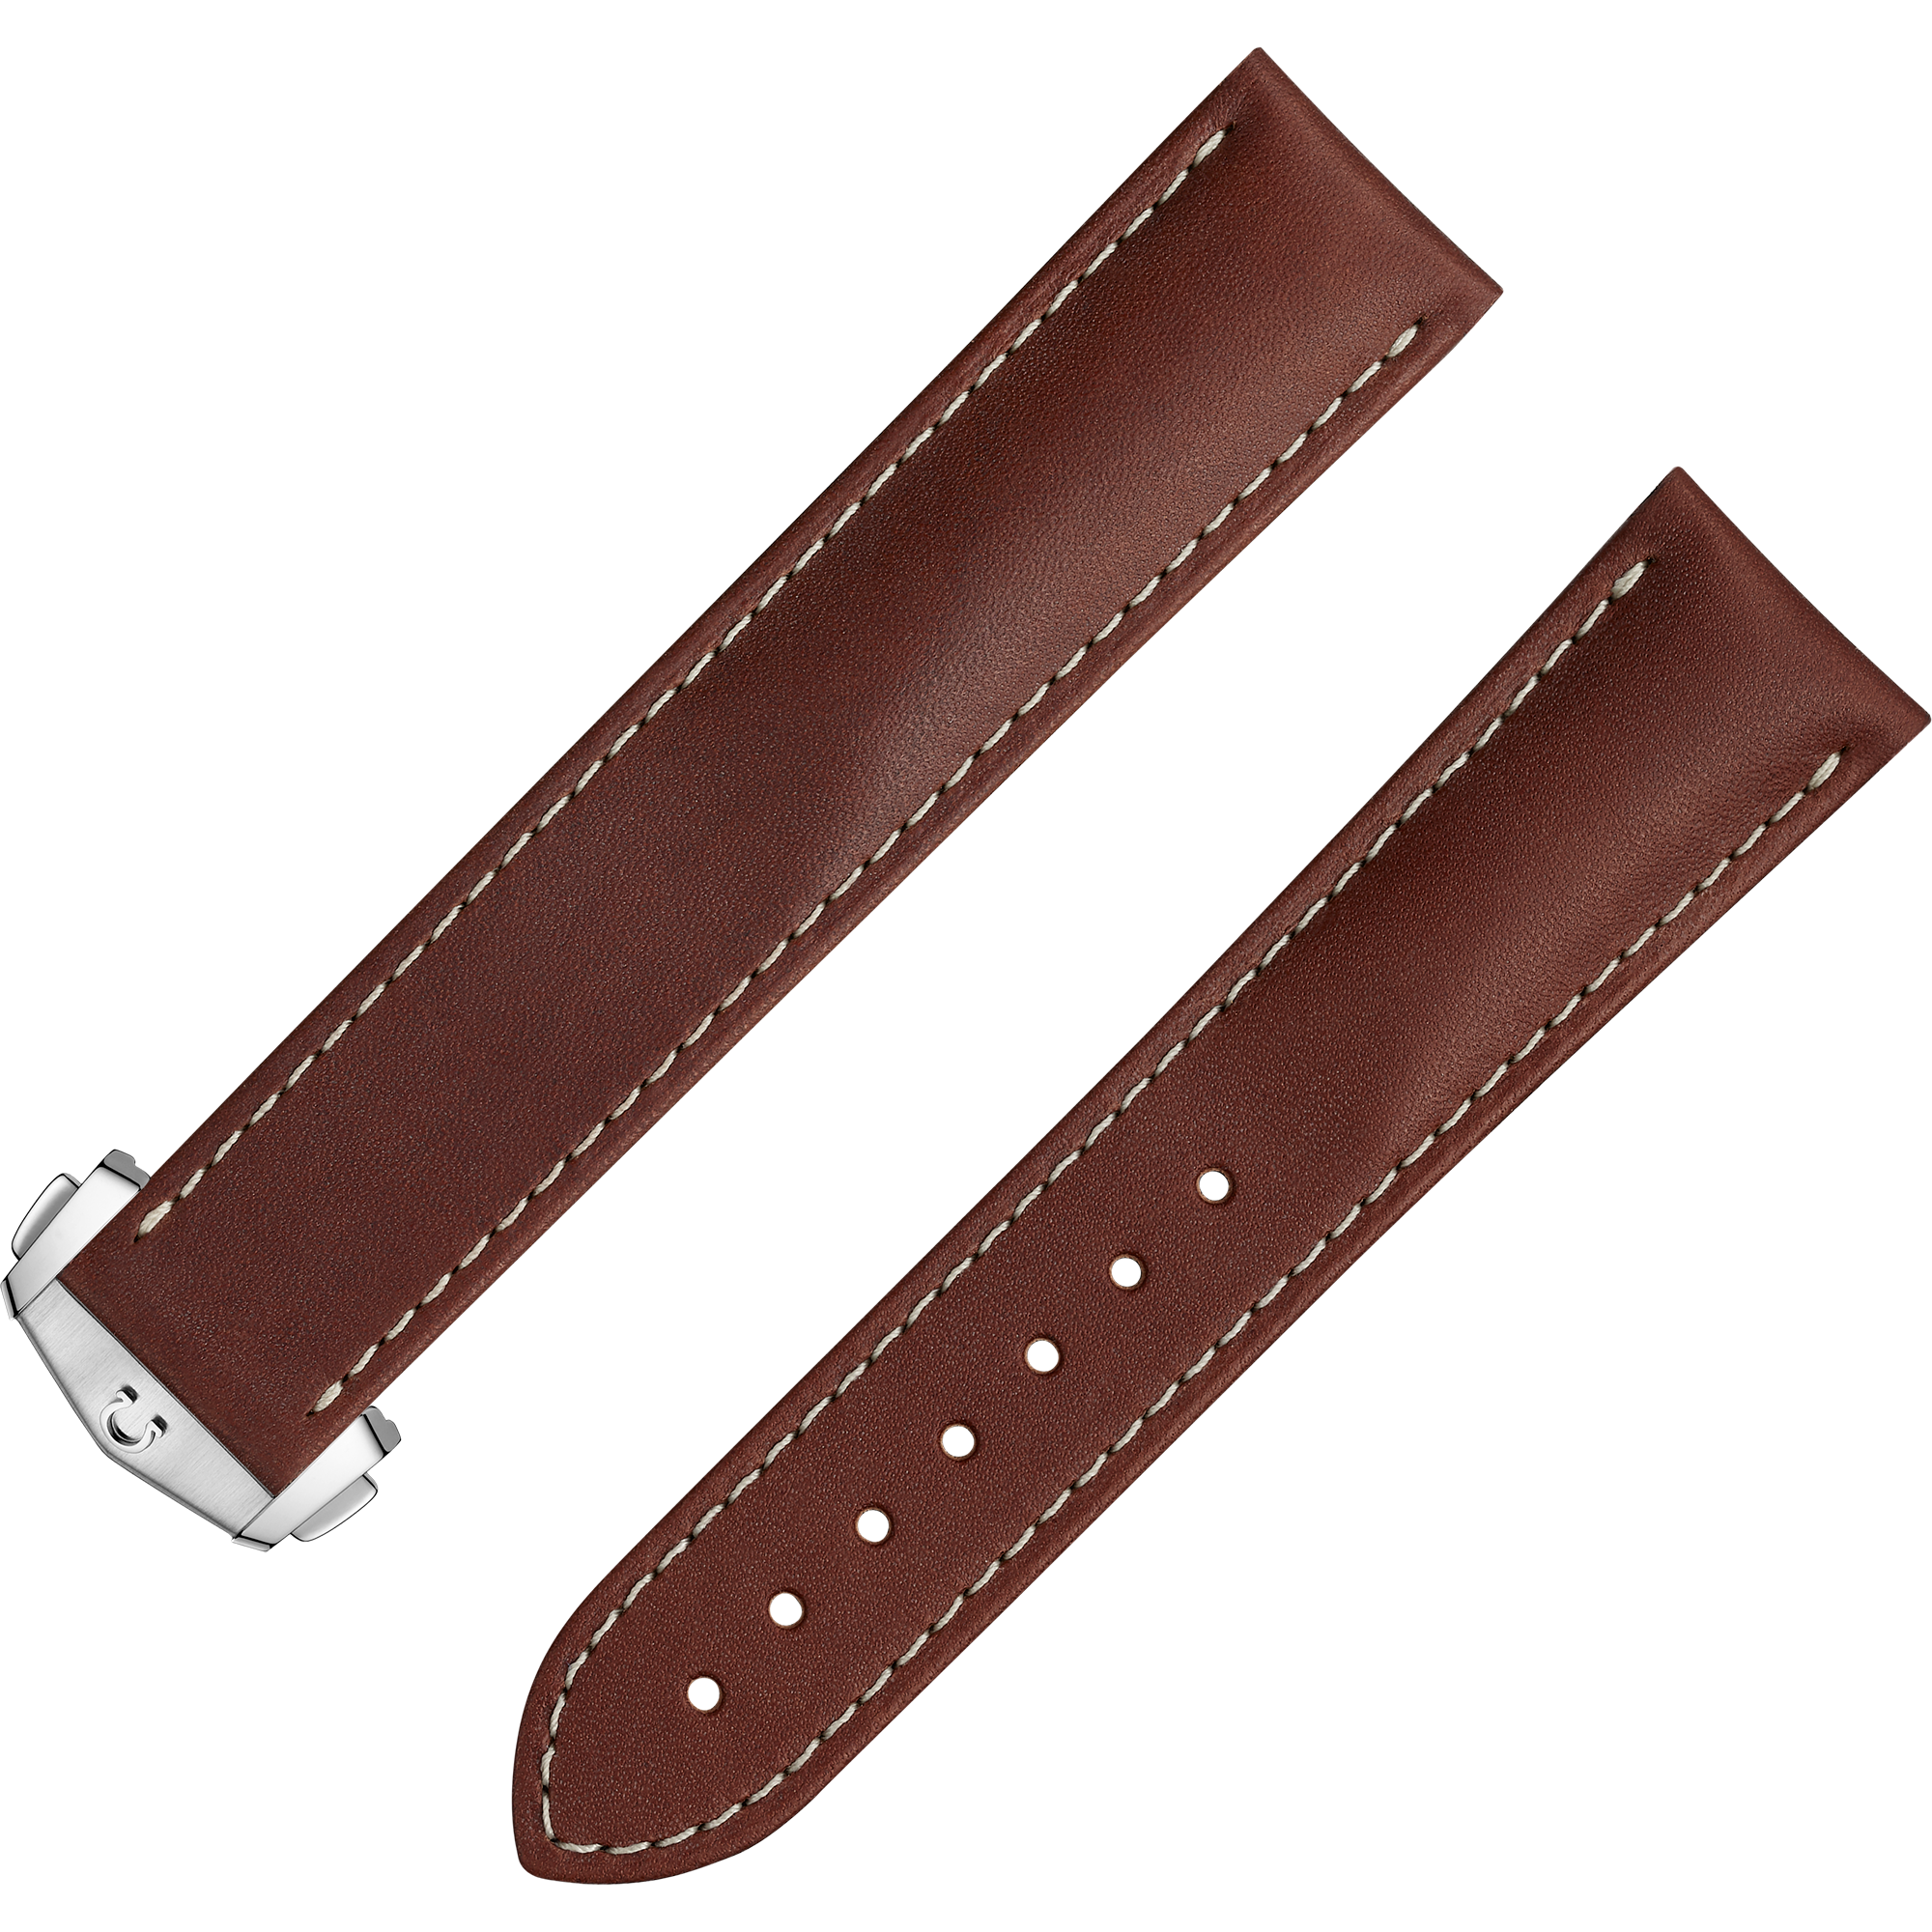 Two-piece strap - Brown leather strap with foldover clasp - 032CUZ006728W